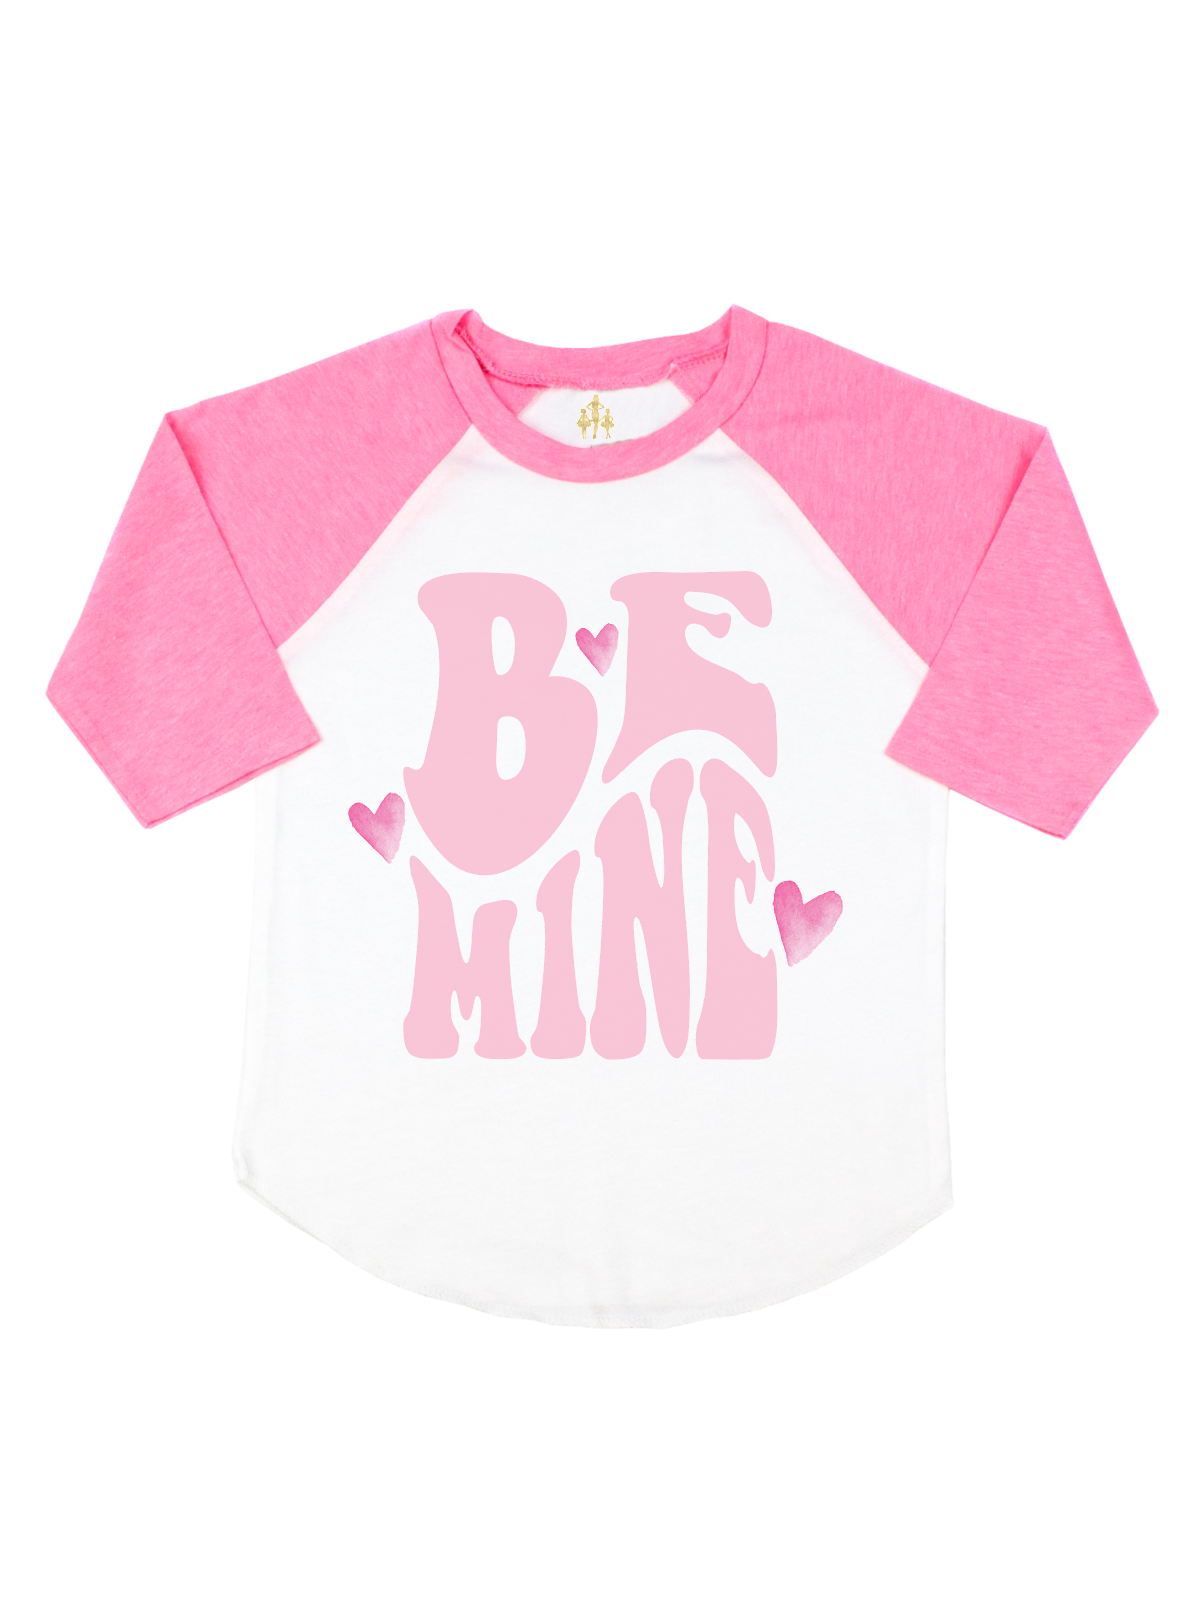 Be Mine Girls Valentine's Day Shirt in Pink and White